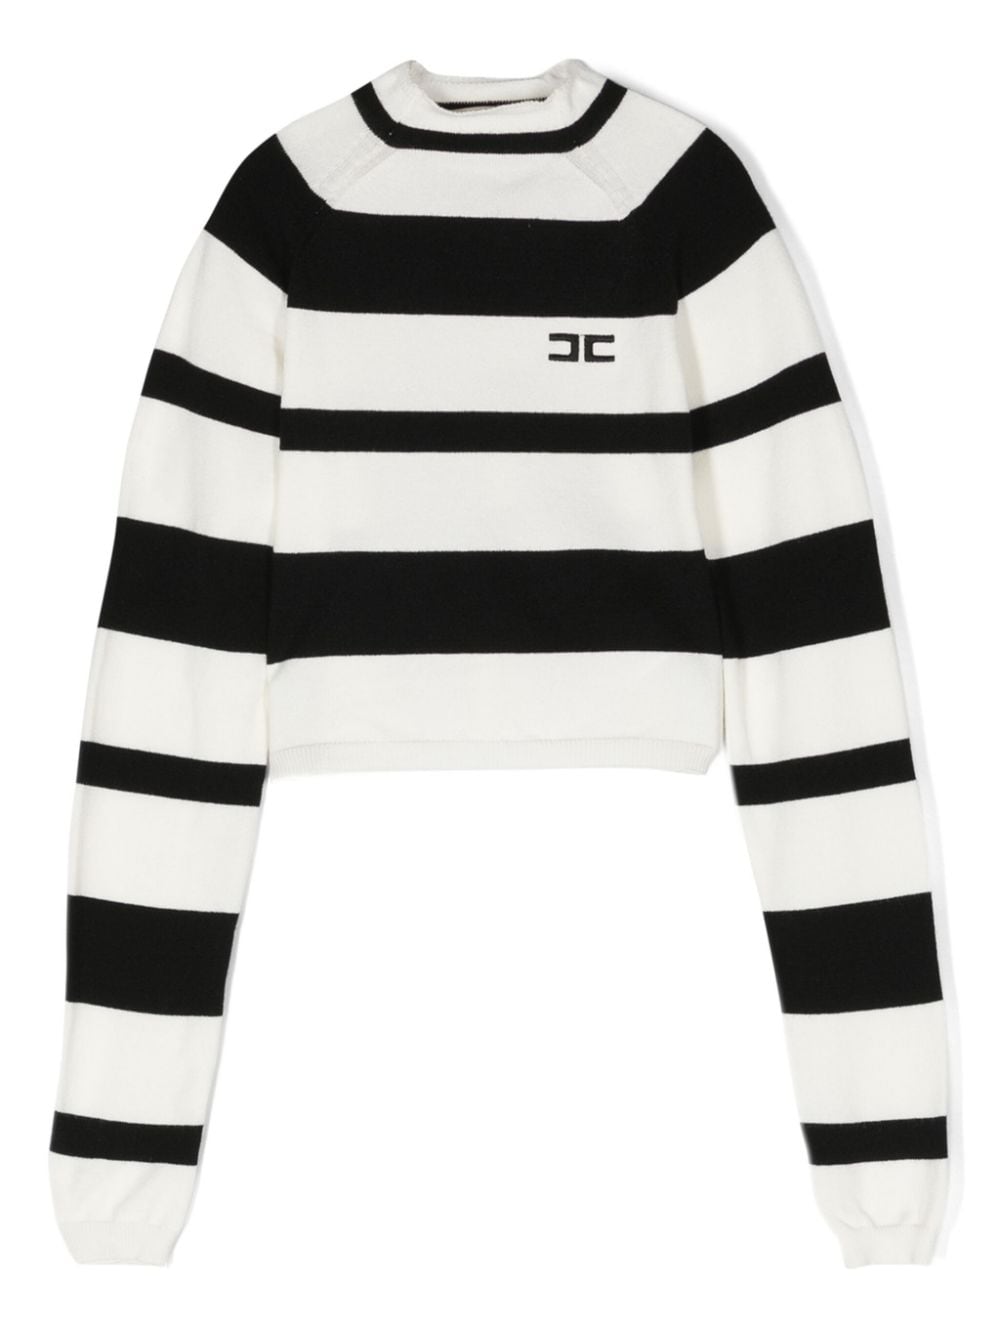 Black and white striped sweater for girls